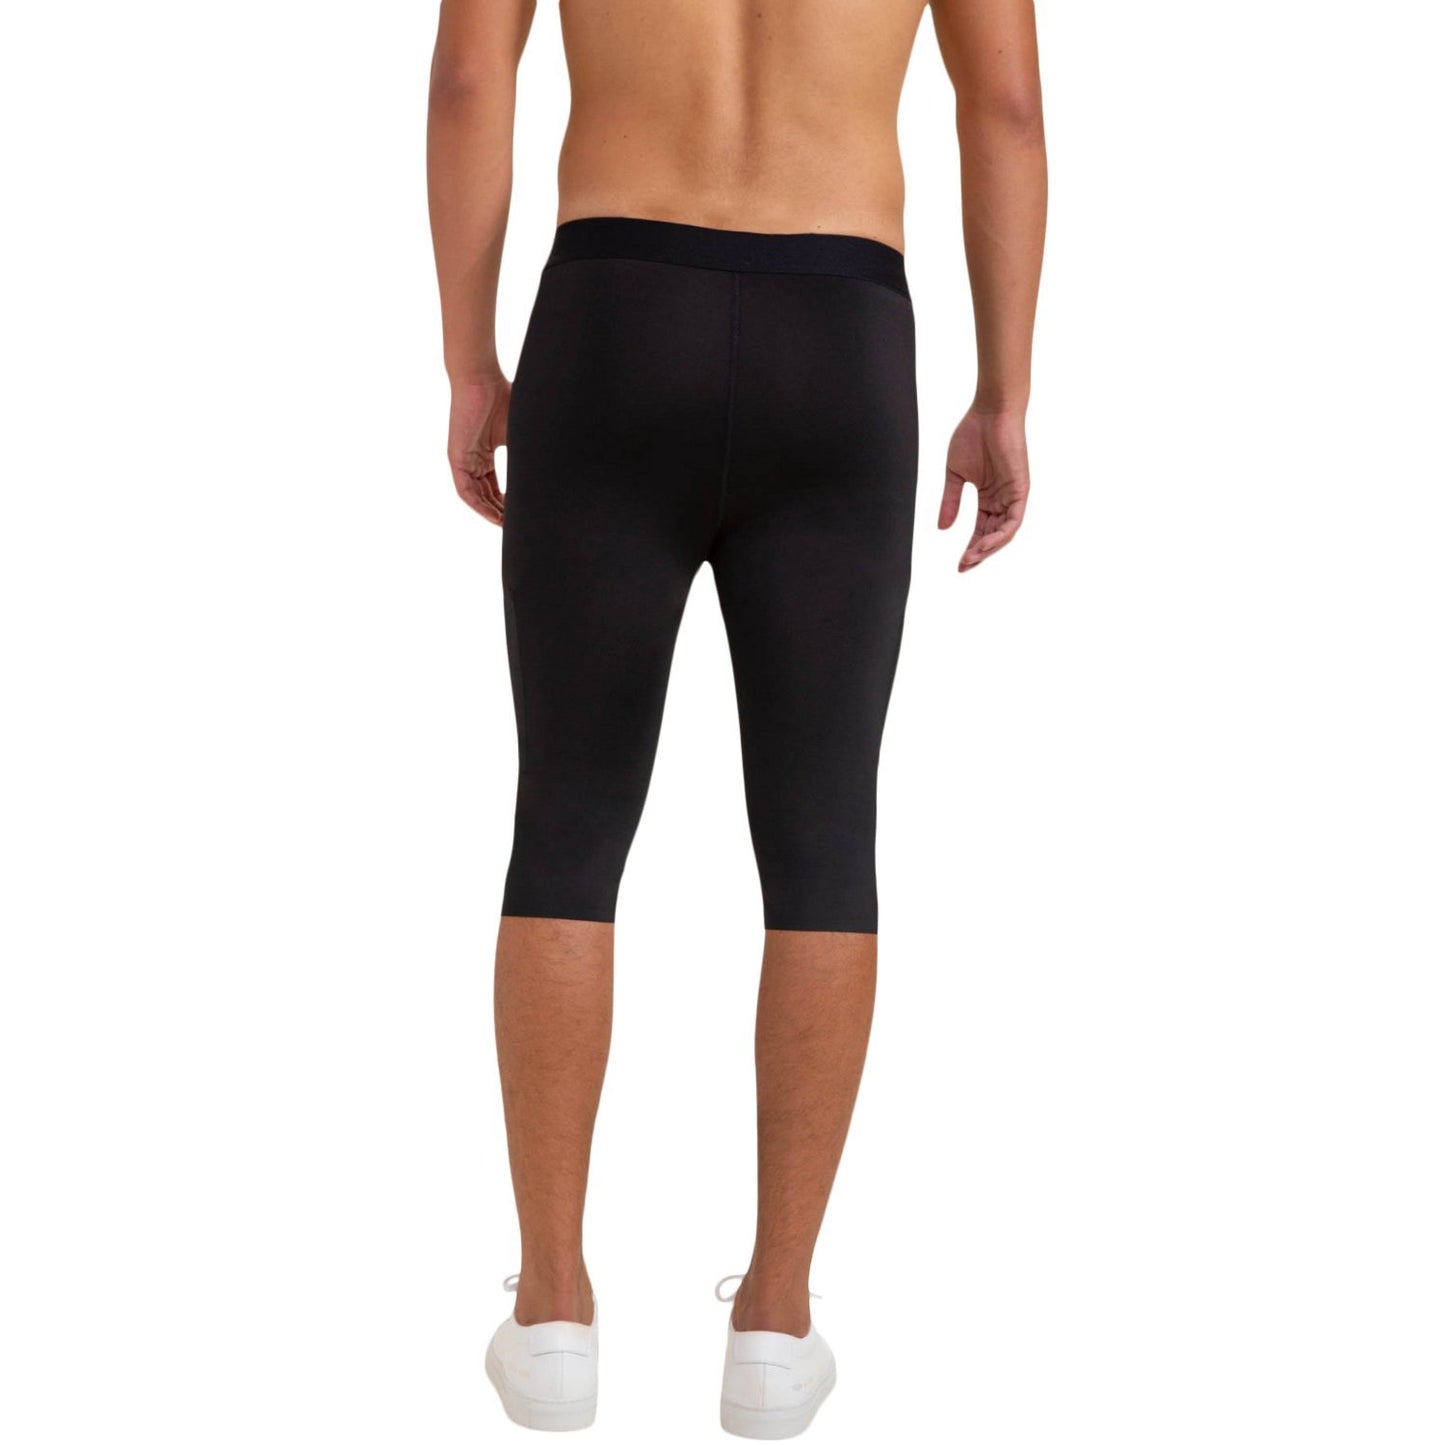 Buy Performance Compression Tights by EHPlabs online - EHPlabs